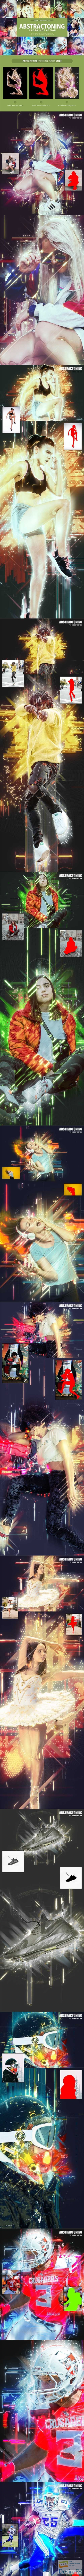 Abstractoning Photoshop Action 3329476